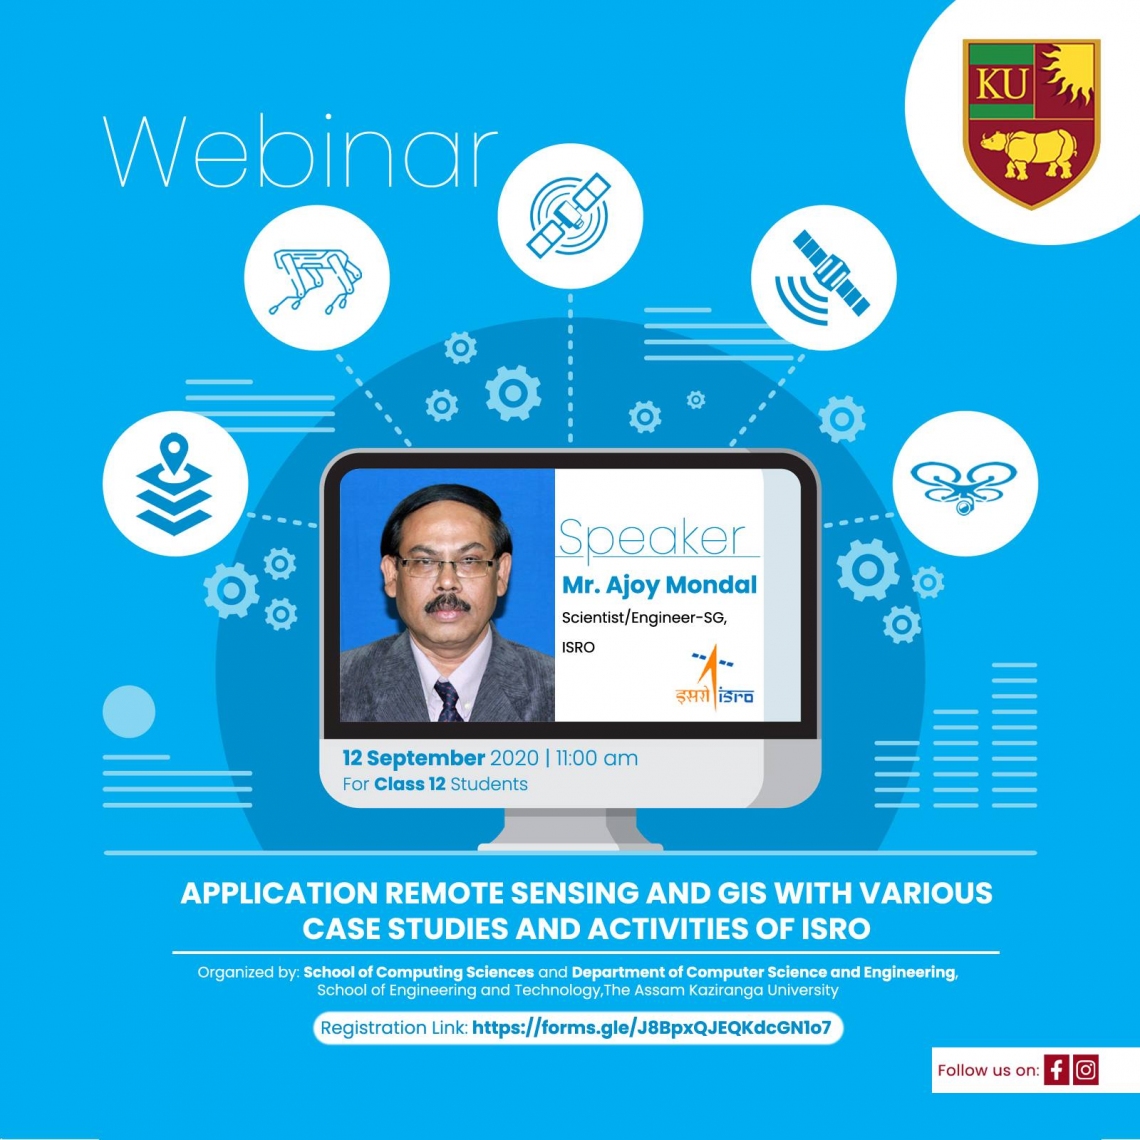 Webinar on Application Remote Sensing and Gis with Various Case Studies and Activities of ISRO